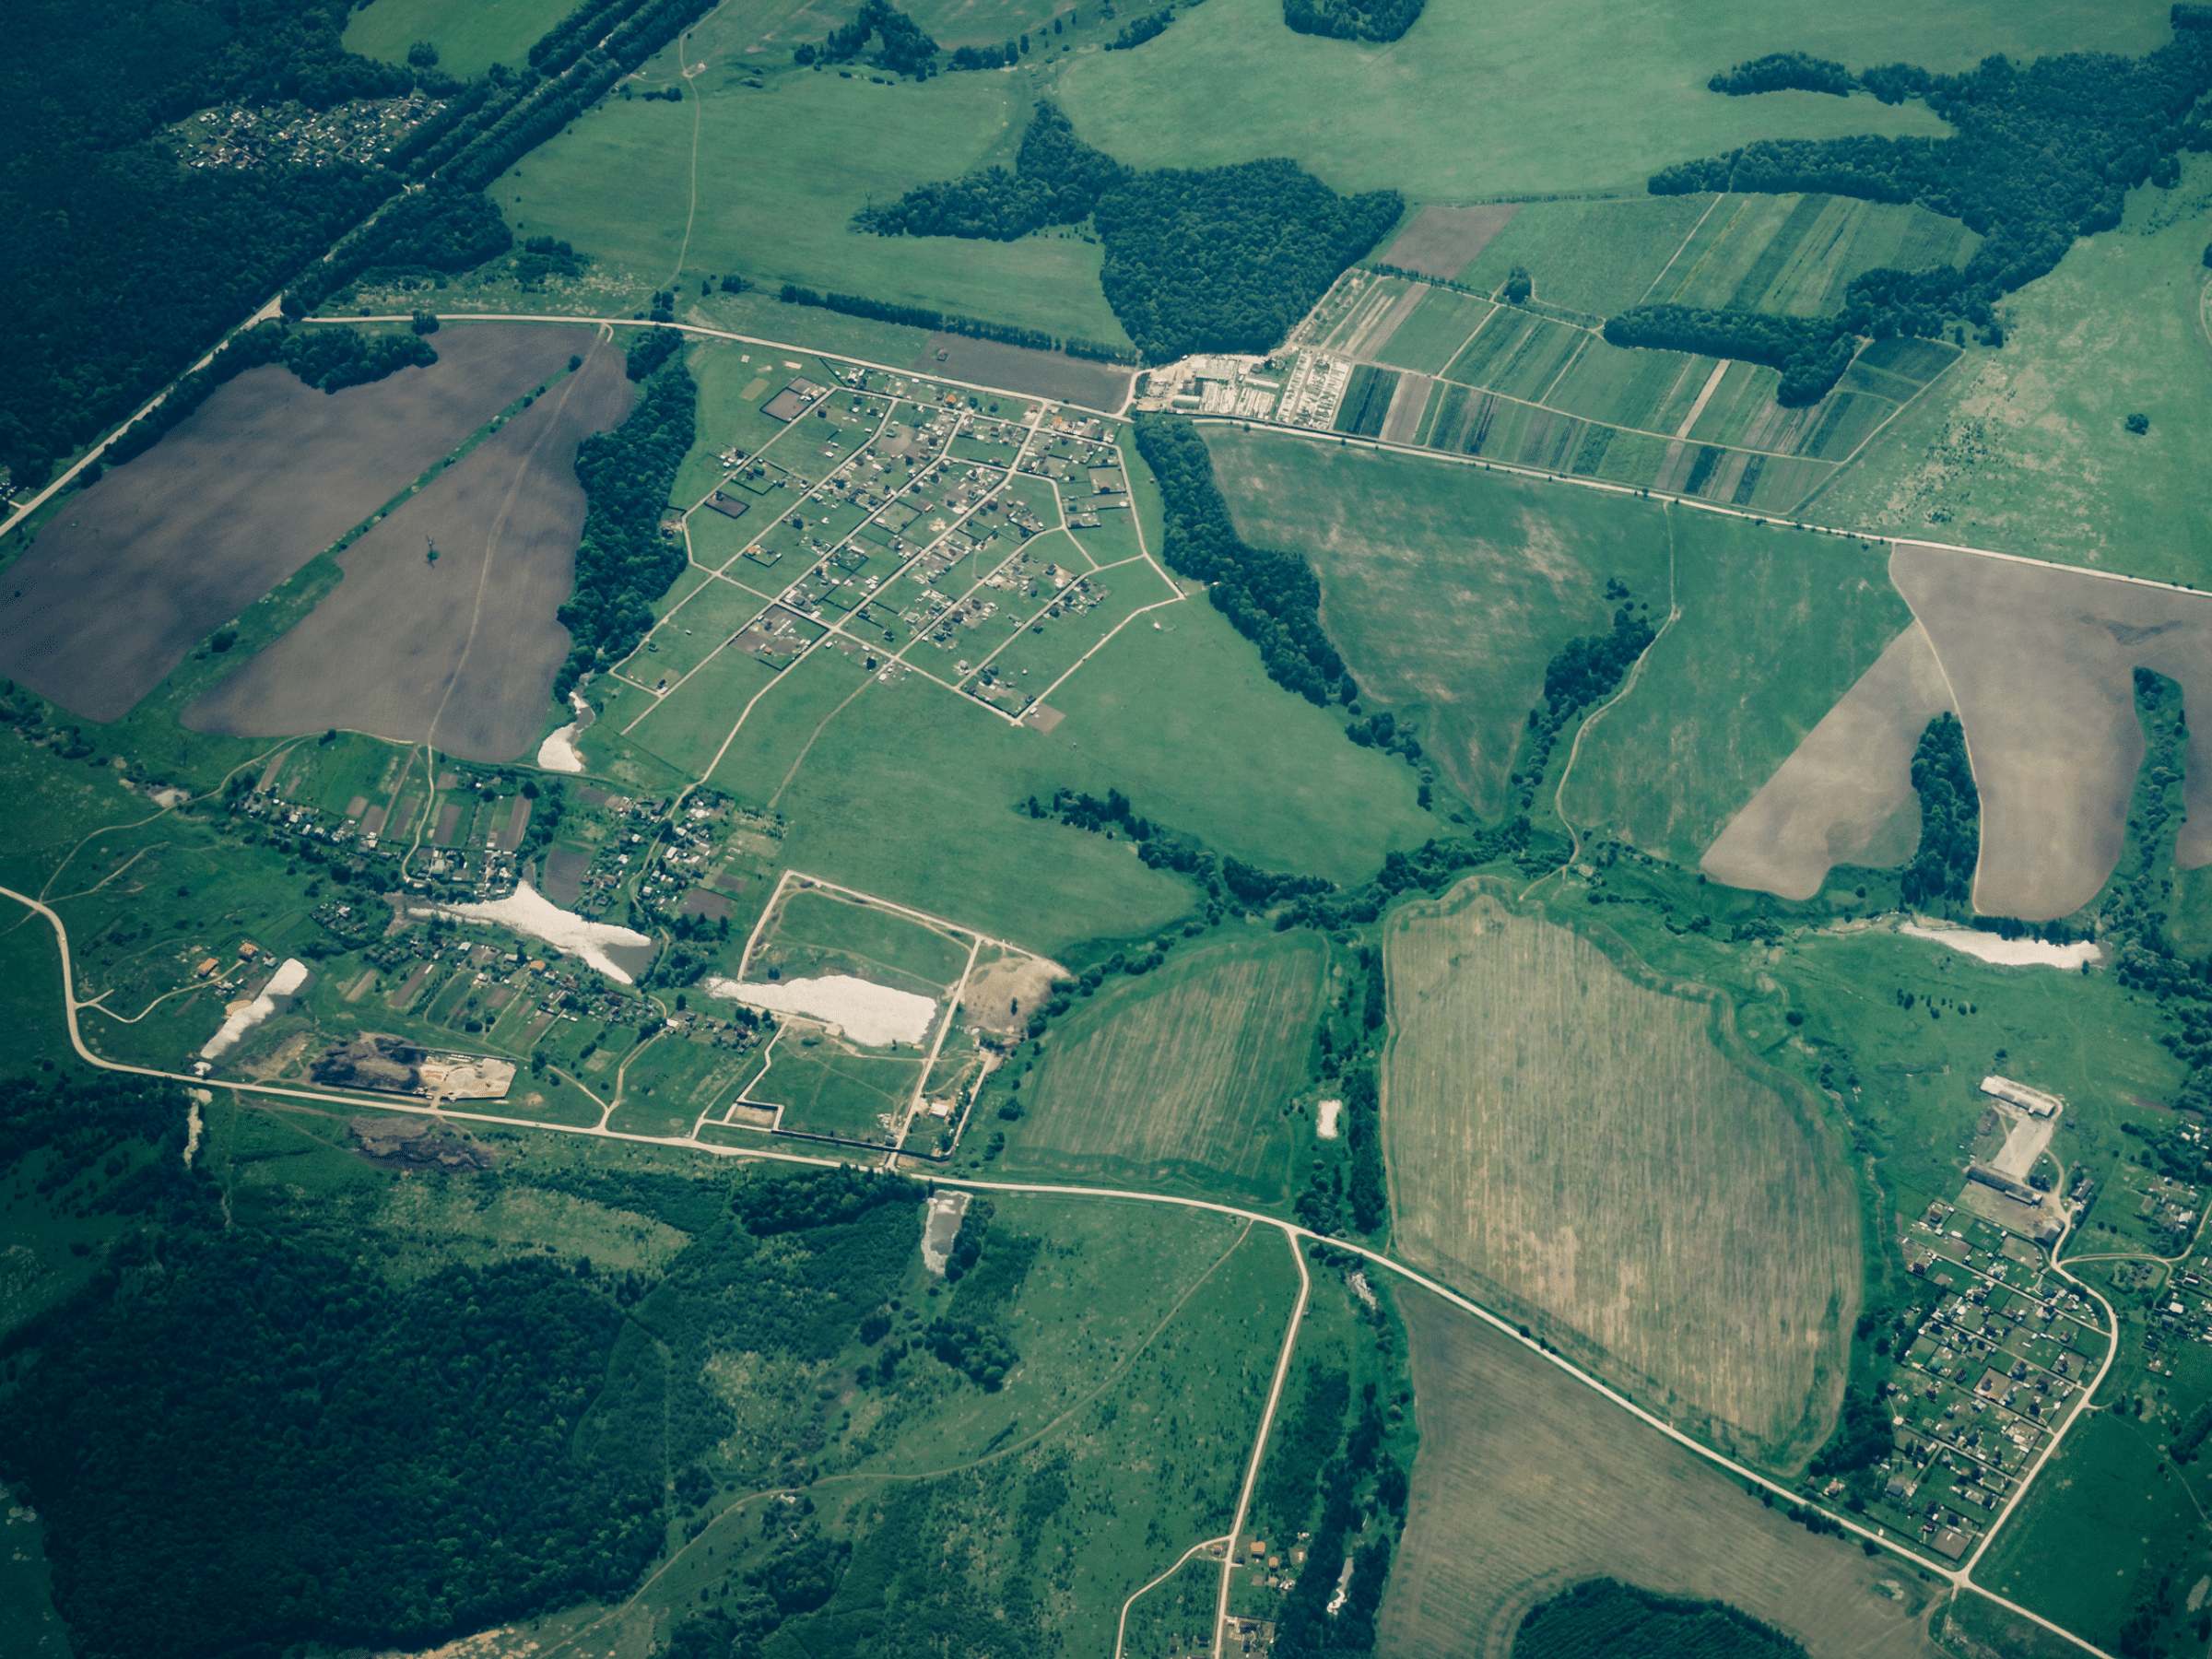 Aerial view of lots to build prefabricated housing.